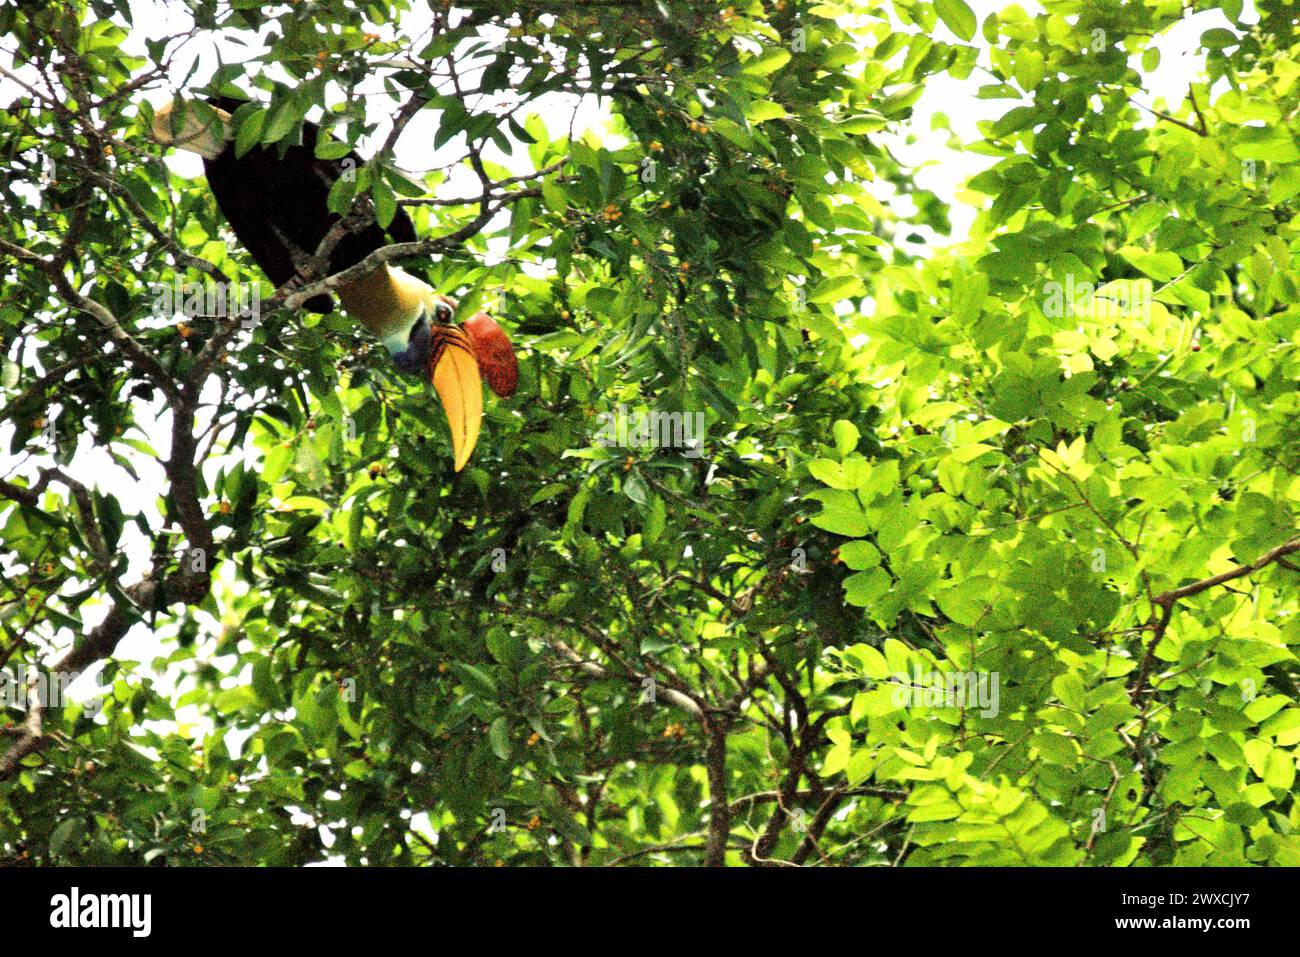 A male individual of knobbed hornbill (Rhyticeros cassidix) forages on a tree in Tangkoko Nature Reserve, North Sulawesi, Indonesia. Climate change is altering environmental niches, causing species to shift their habitat range as they track their ecological niche, that could be a disadvantage in terms of effective management for biodiversity, according to Nature Climate Change. A report by a team of scientists led by Marine Joly, based on research conducted since 2012 to 2020, has revealed that the temperature is increasing by up to 0.2 degree Celsius per year in Tangkoko forest, and the... Stock Photo